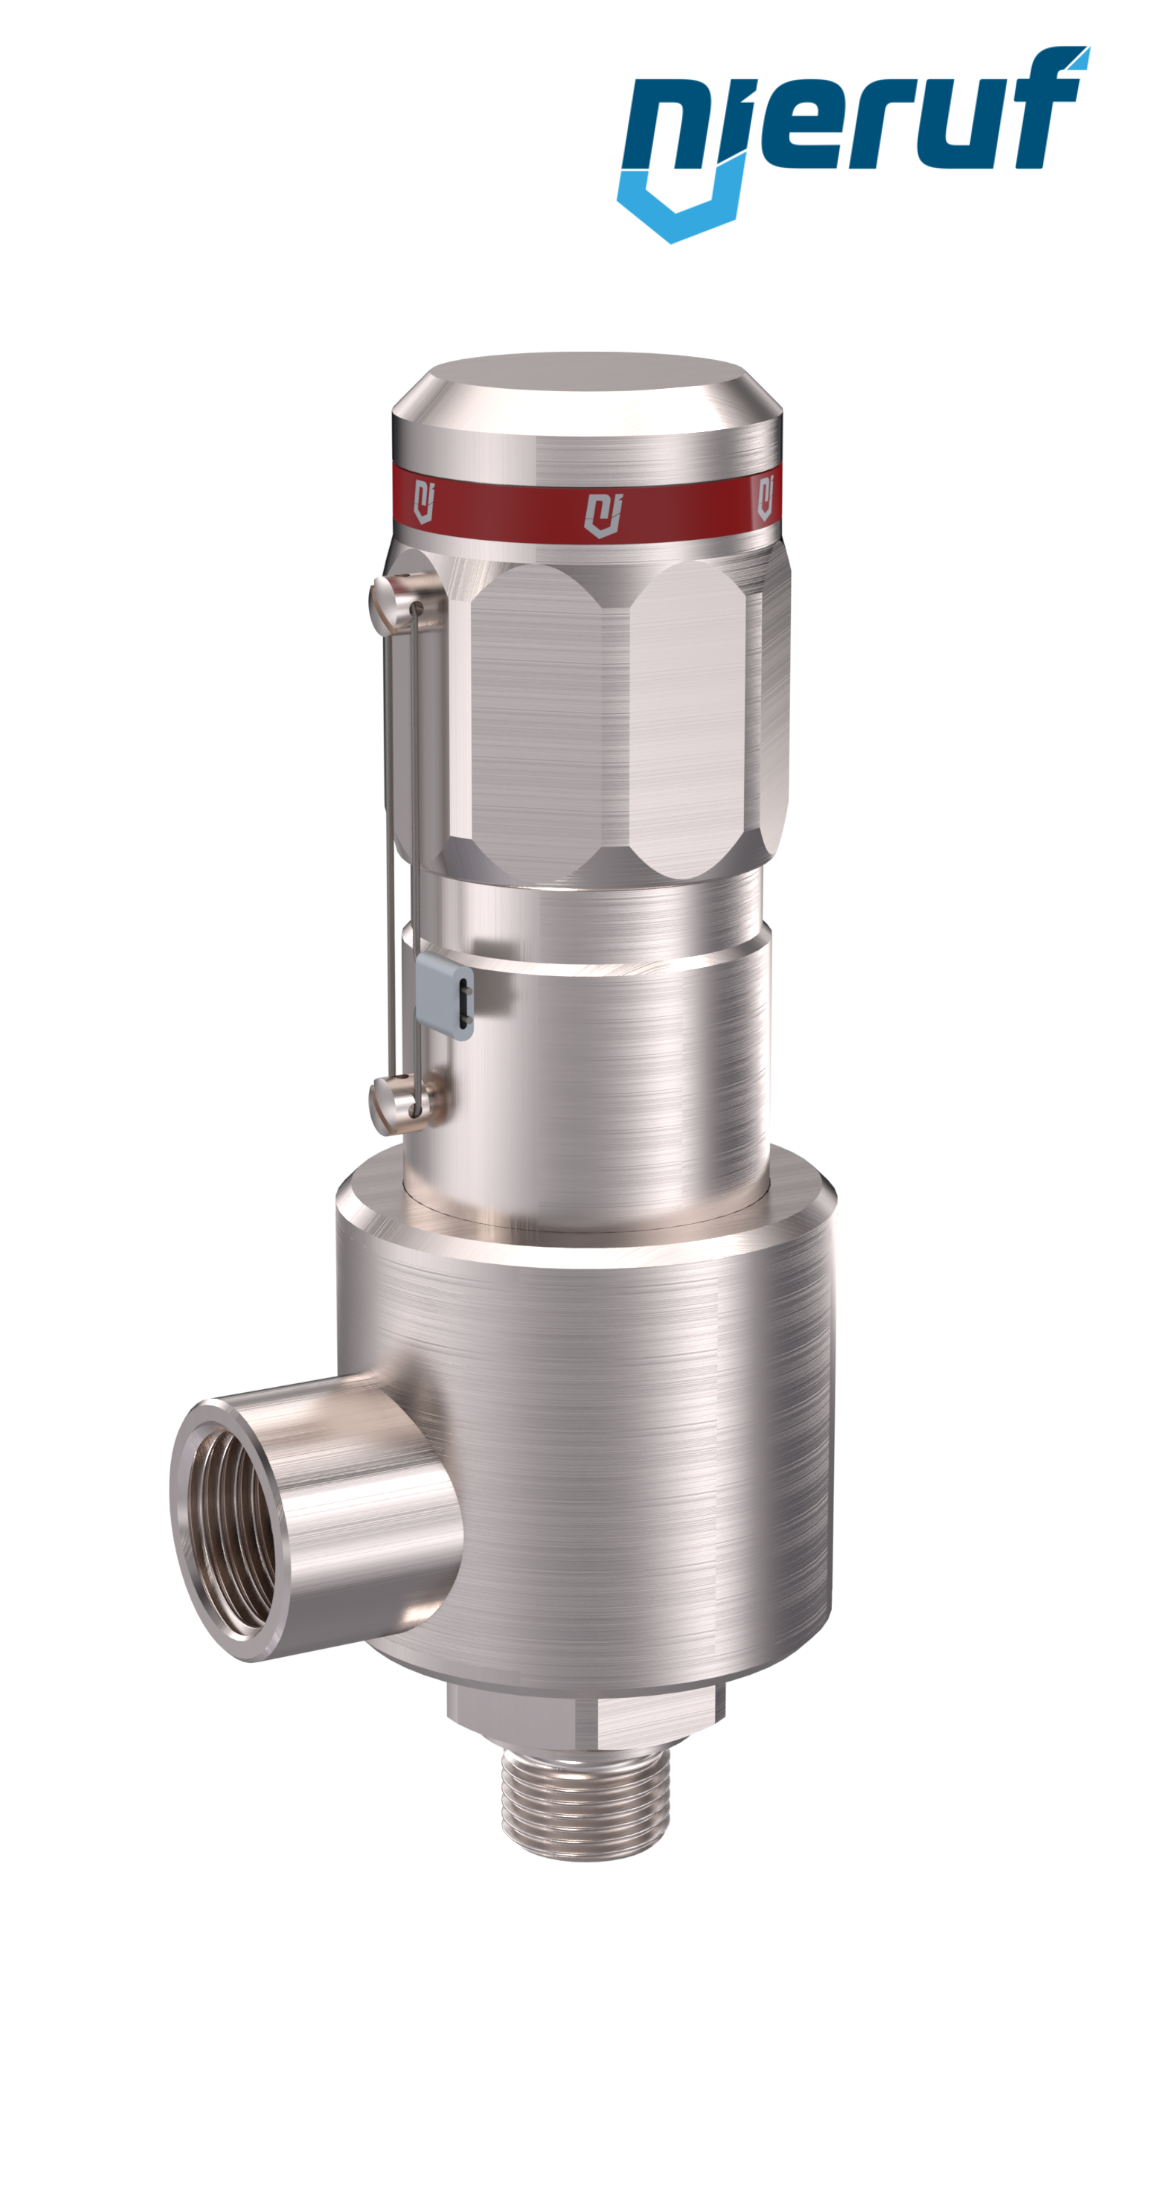 safety-valve DN15 3/4" m x 1" fm male thread NPT, SV15, MD / PAI, without lifting device, angle-type, 50,0 - 180,0 bar